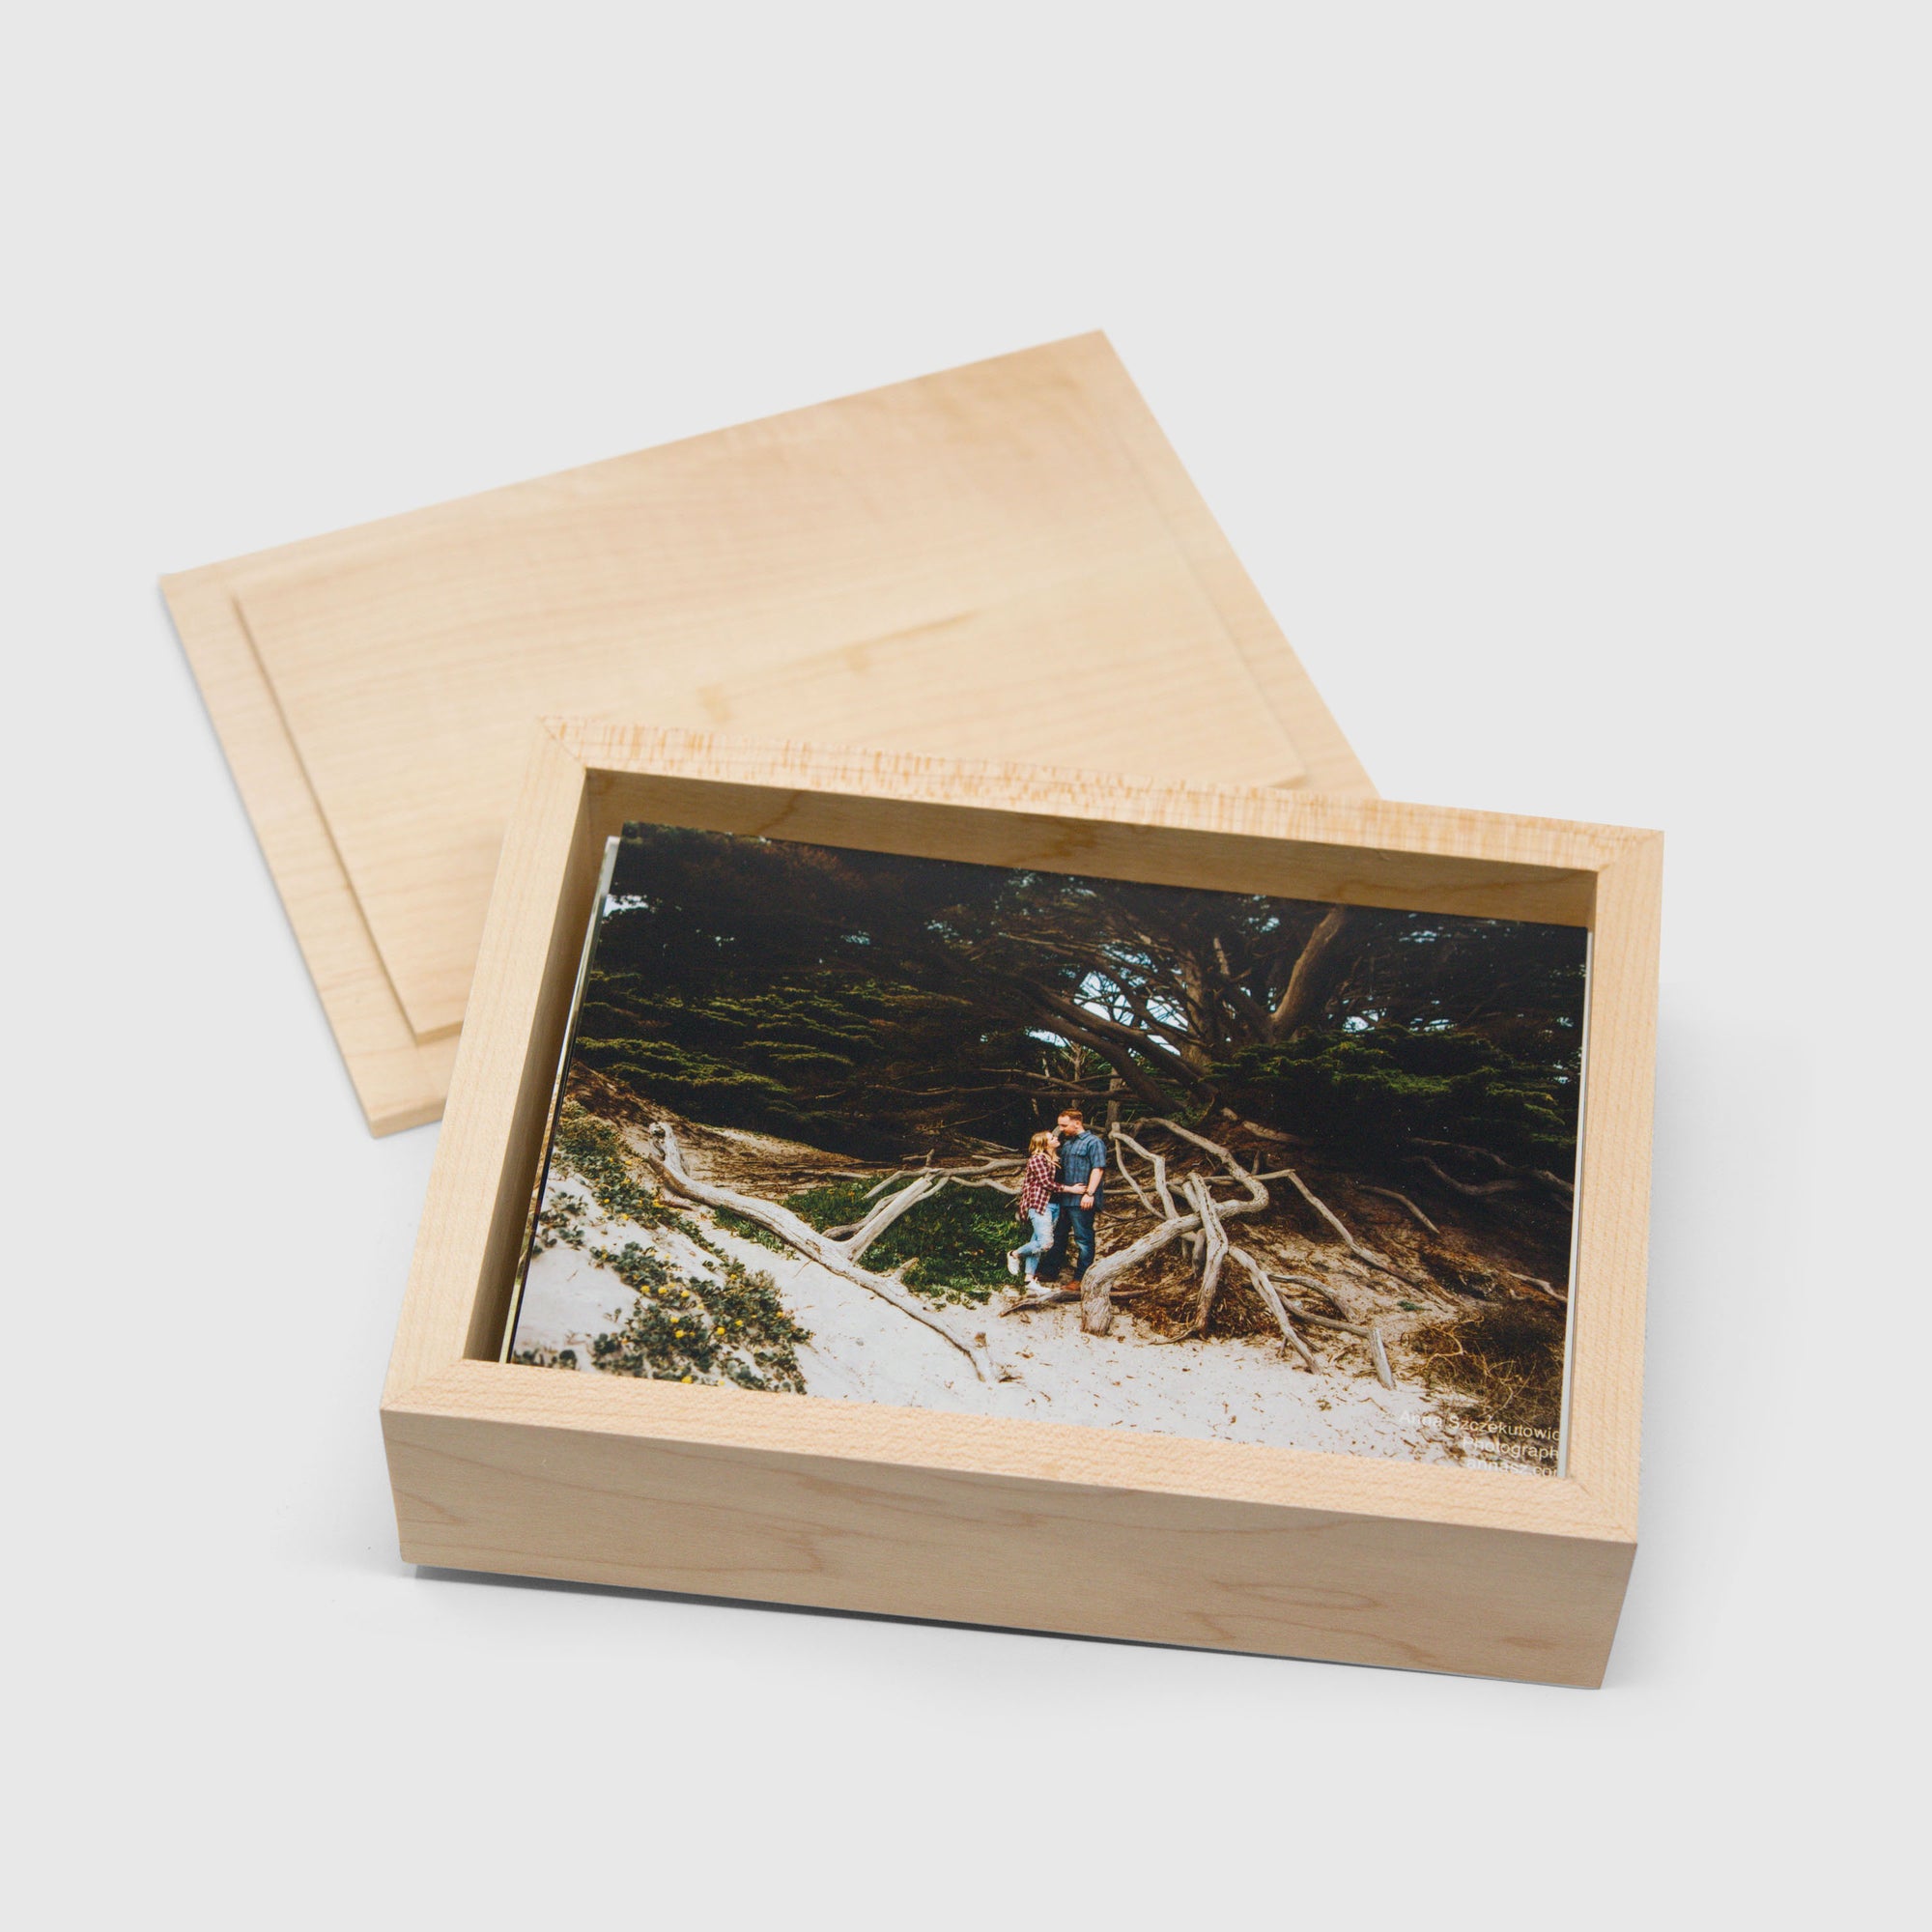 Maple Photo Box with Top Lid